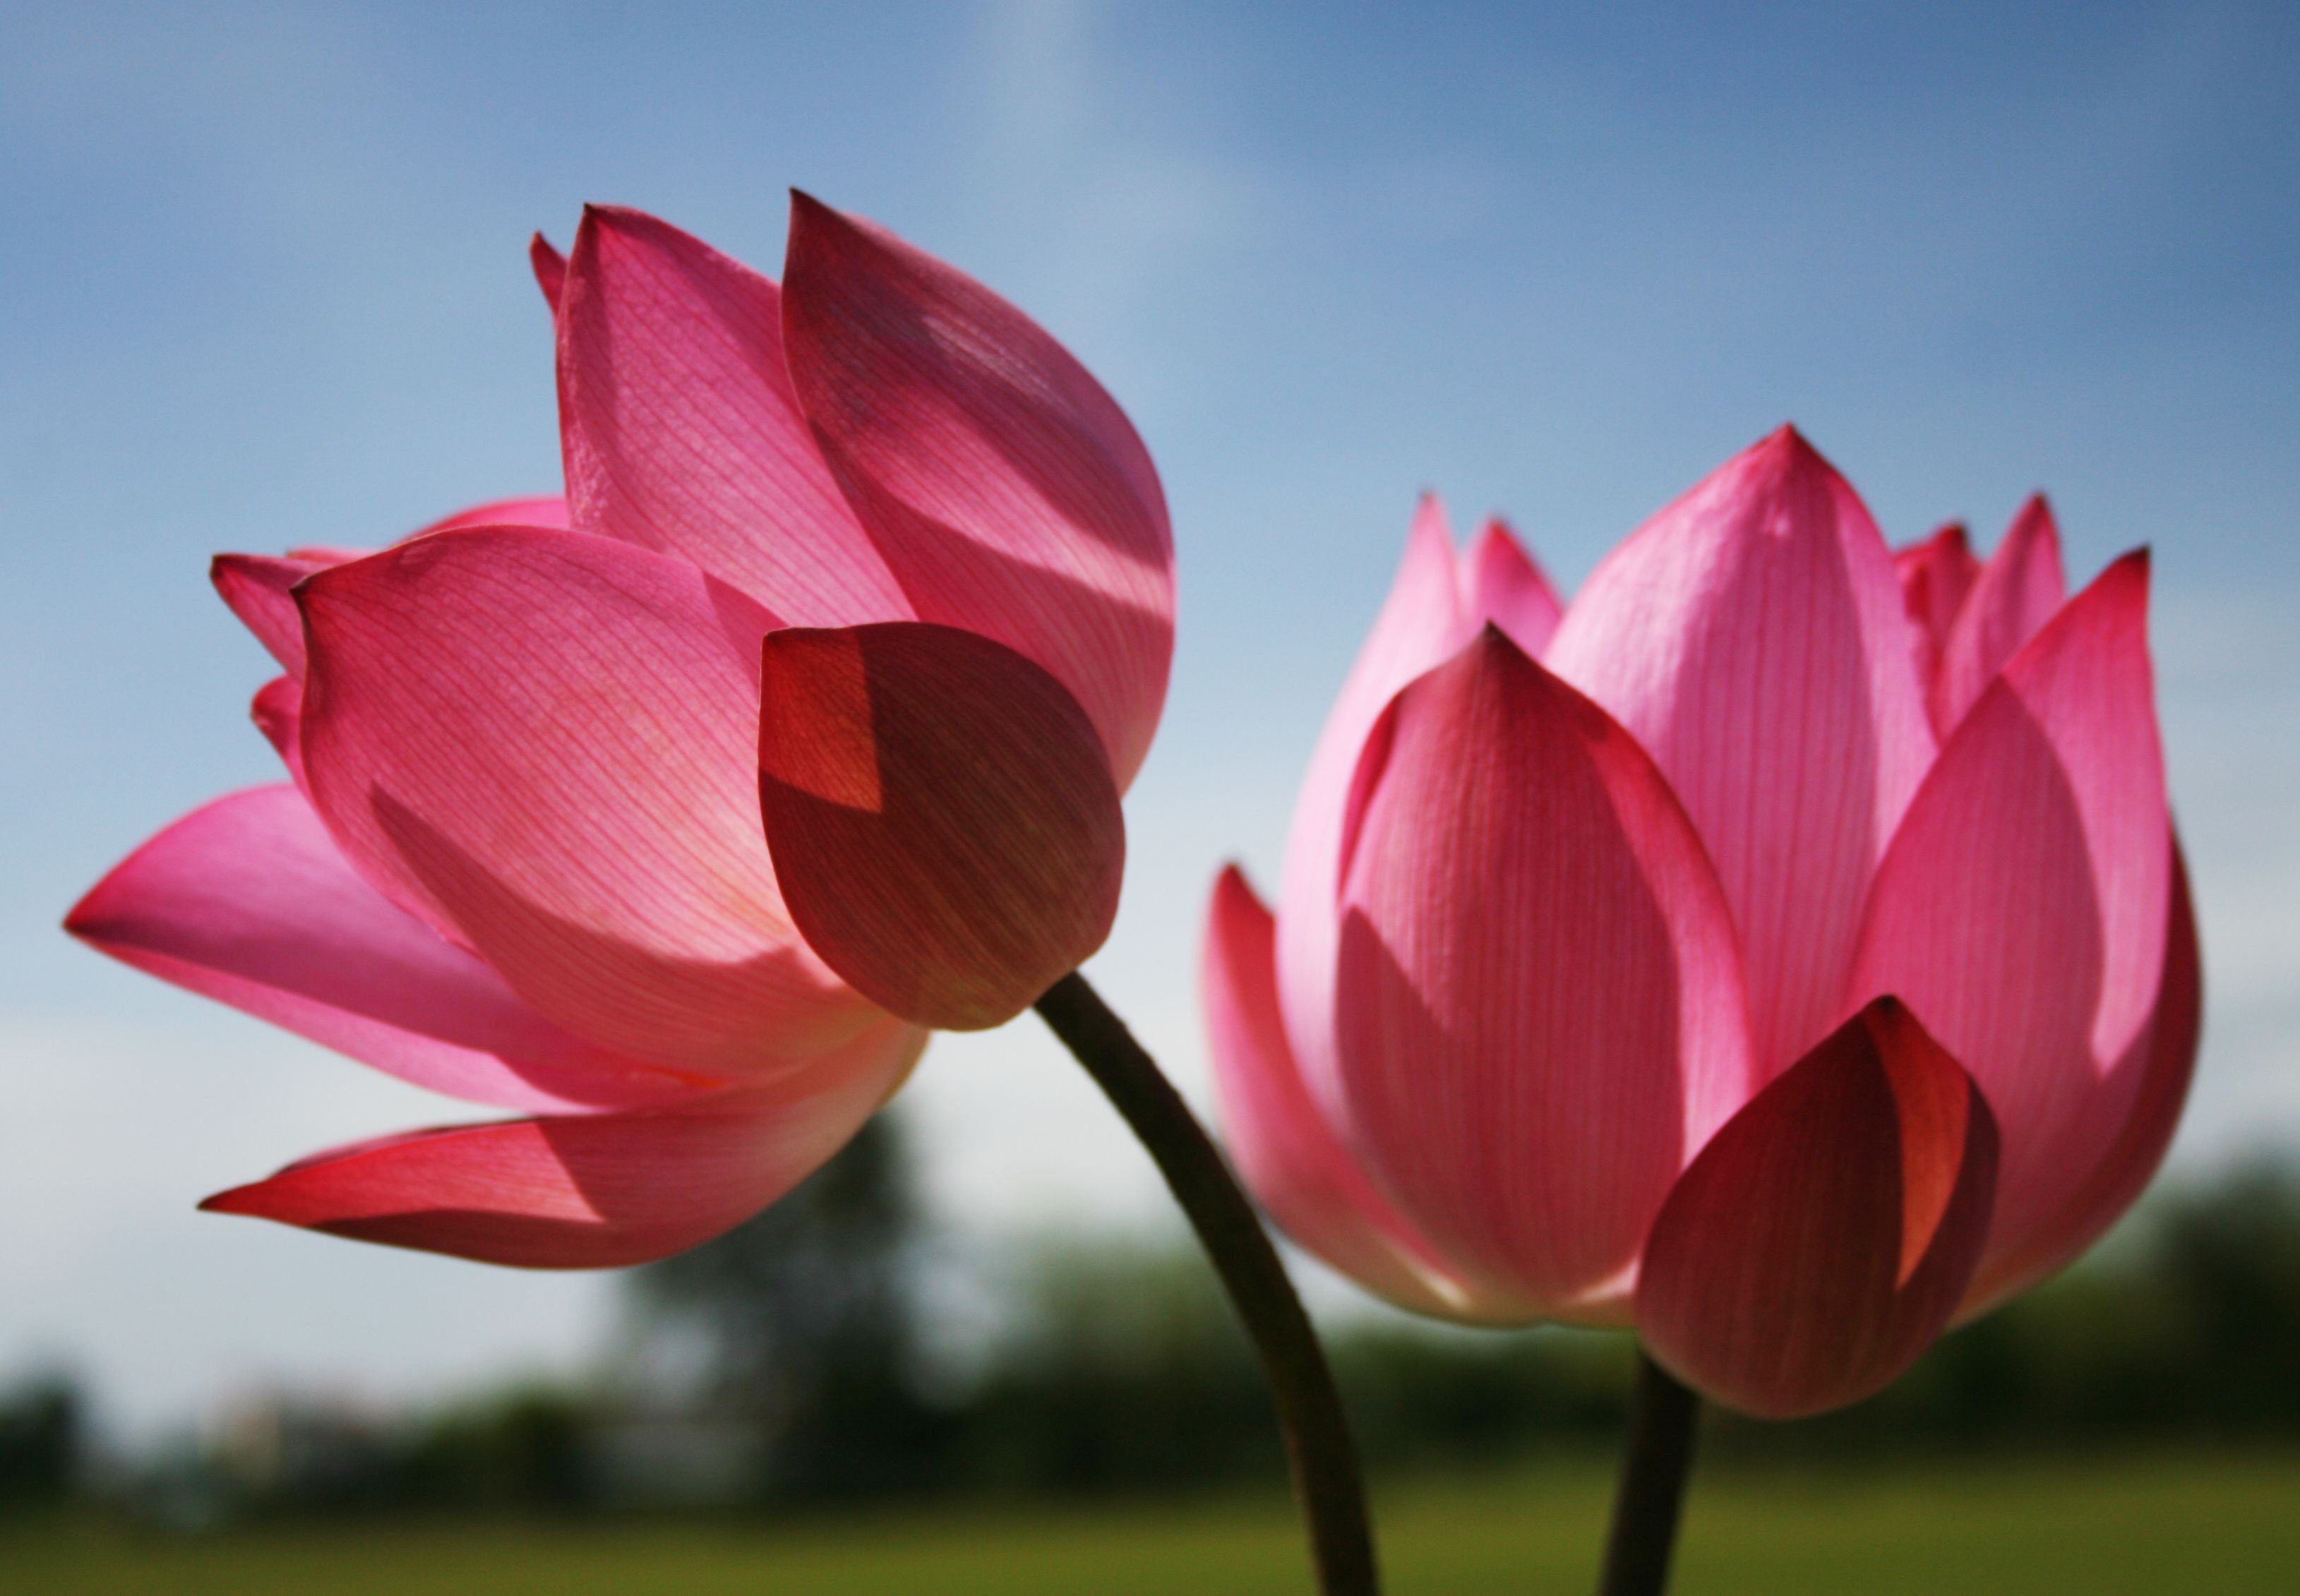 3258x2261 Beautiful Lotus Flower High Resolution Wallpaper Hd Wallpaper Wallpaper Download High Resolution Wallpaper Lotus Flower Wallpaper Lotus Flower Picture Flower Image